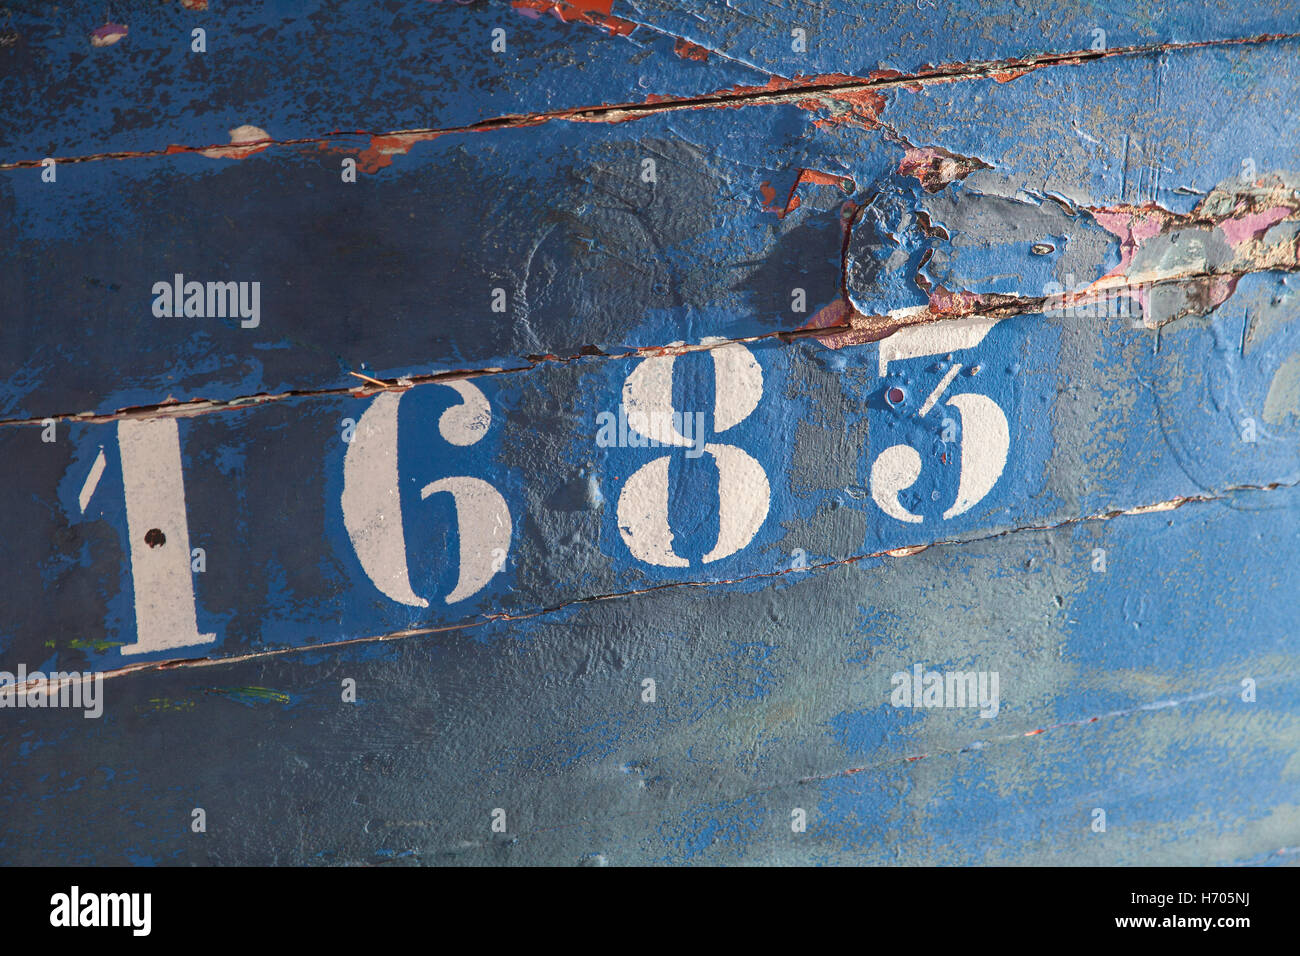 Number on Fishing Boat, Vieux Port, Marseille, France Stock Photo